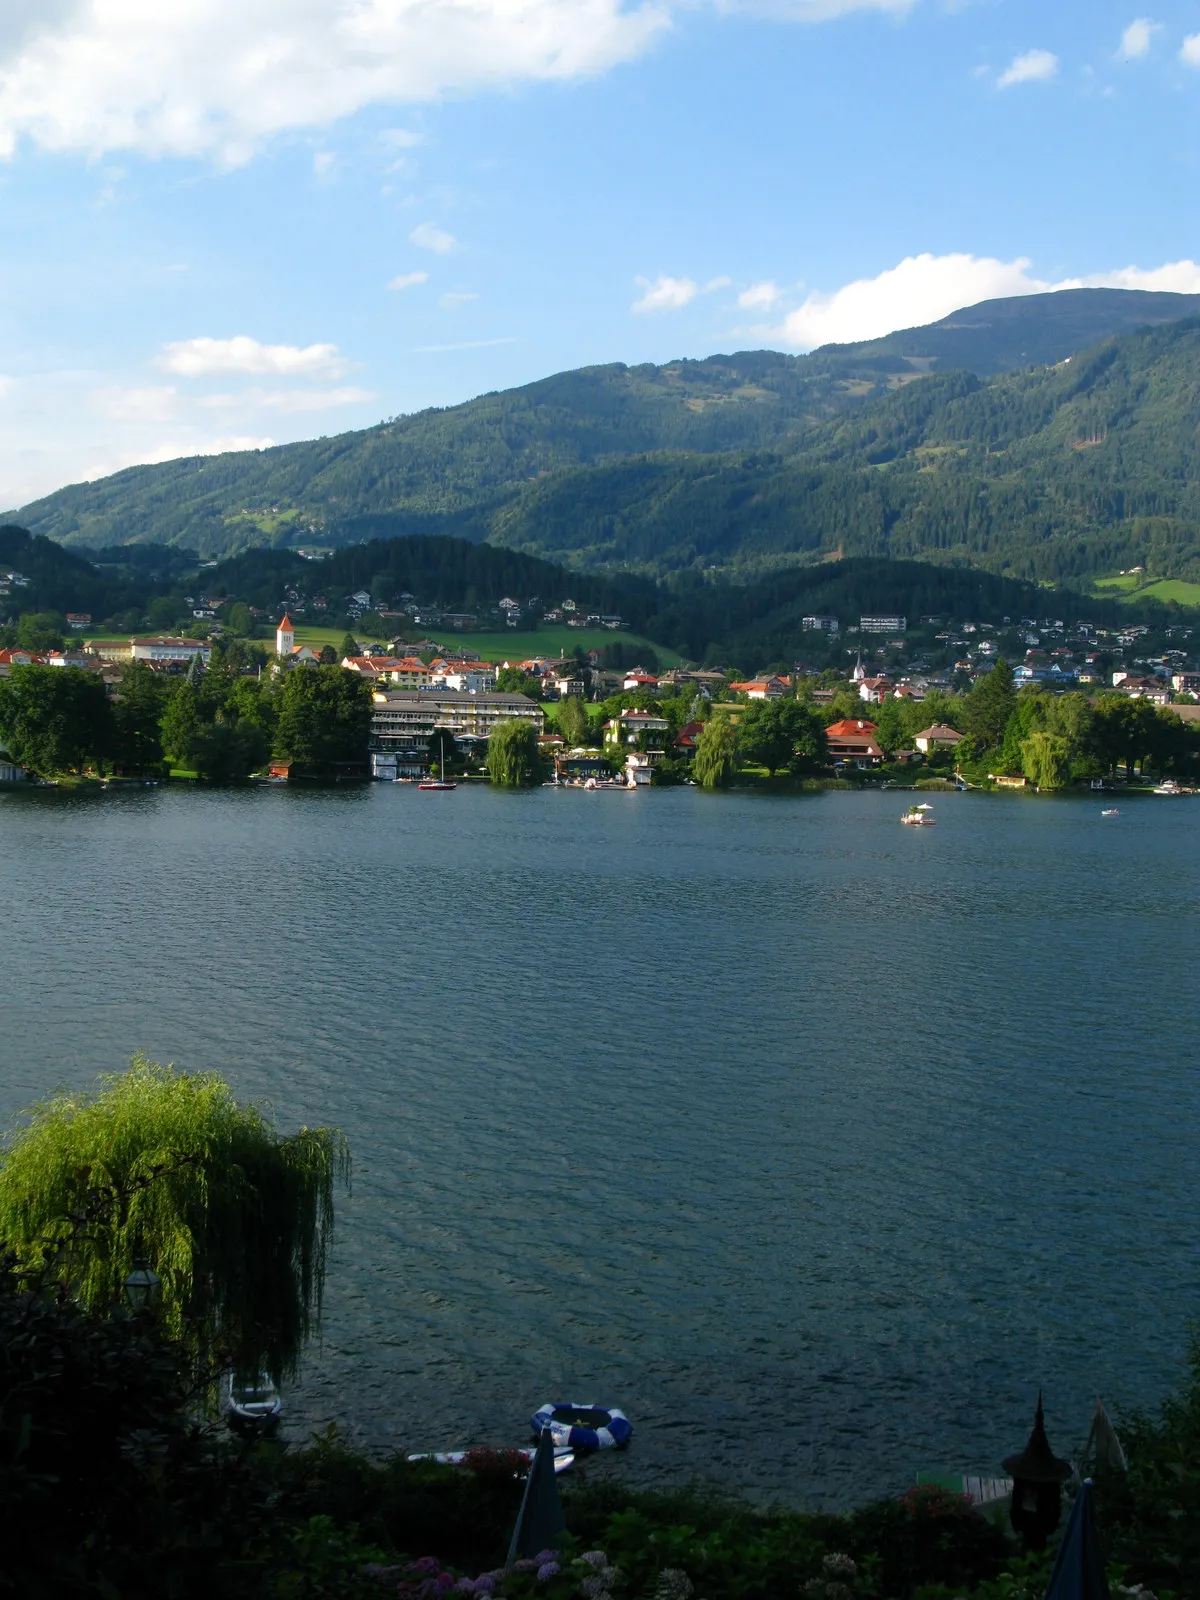 Photo showing: Seeboden / Carinthia / Austria / European Union. The photo shows the church and the district Wirlsdorf. There are hotels on the lakeshore.